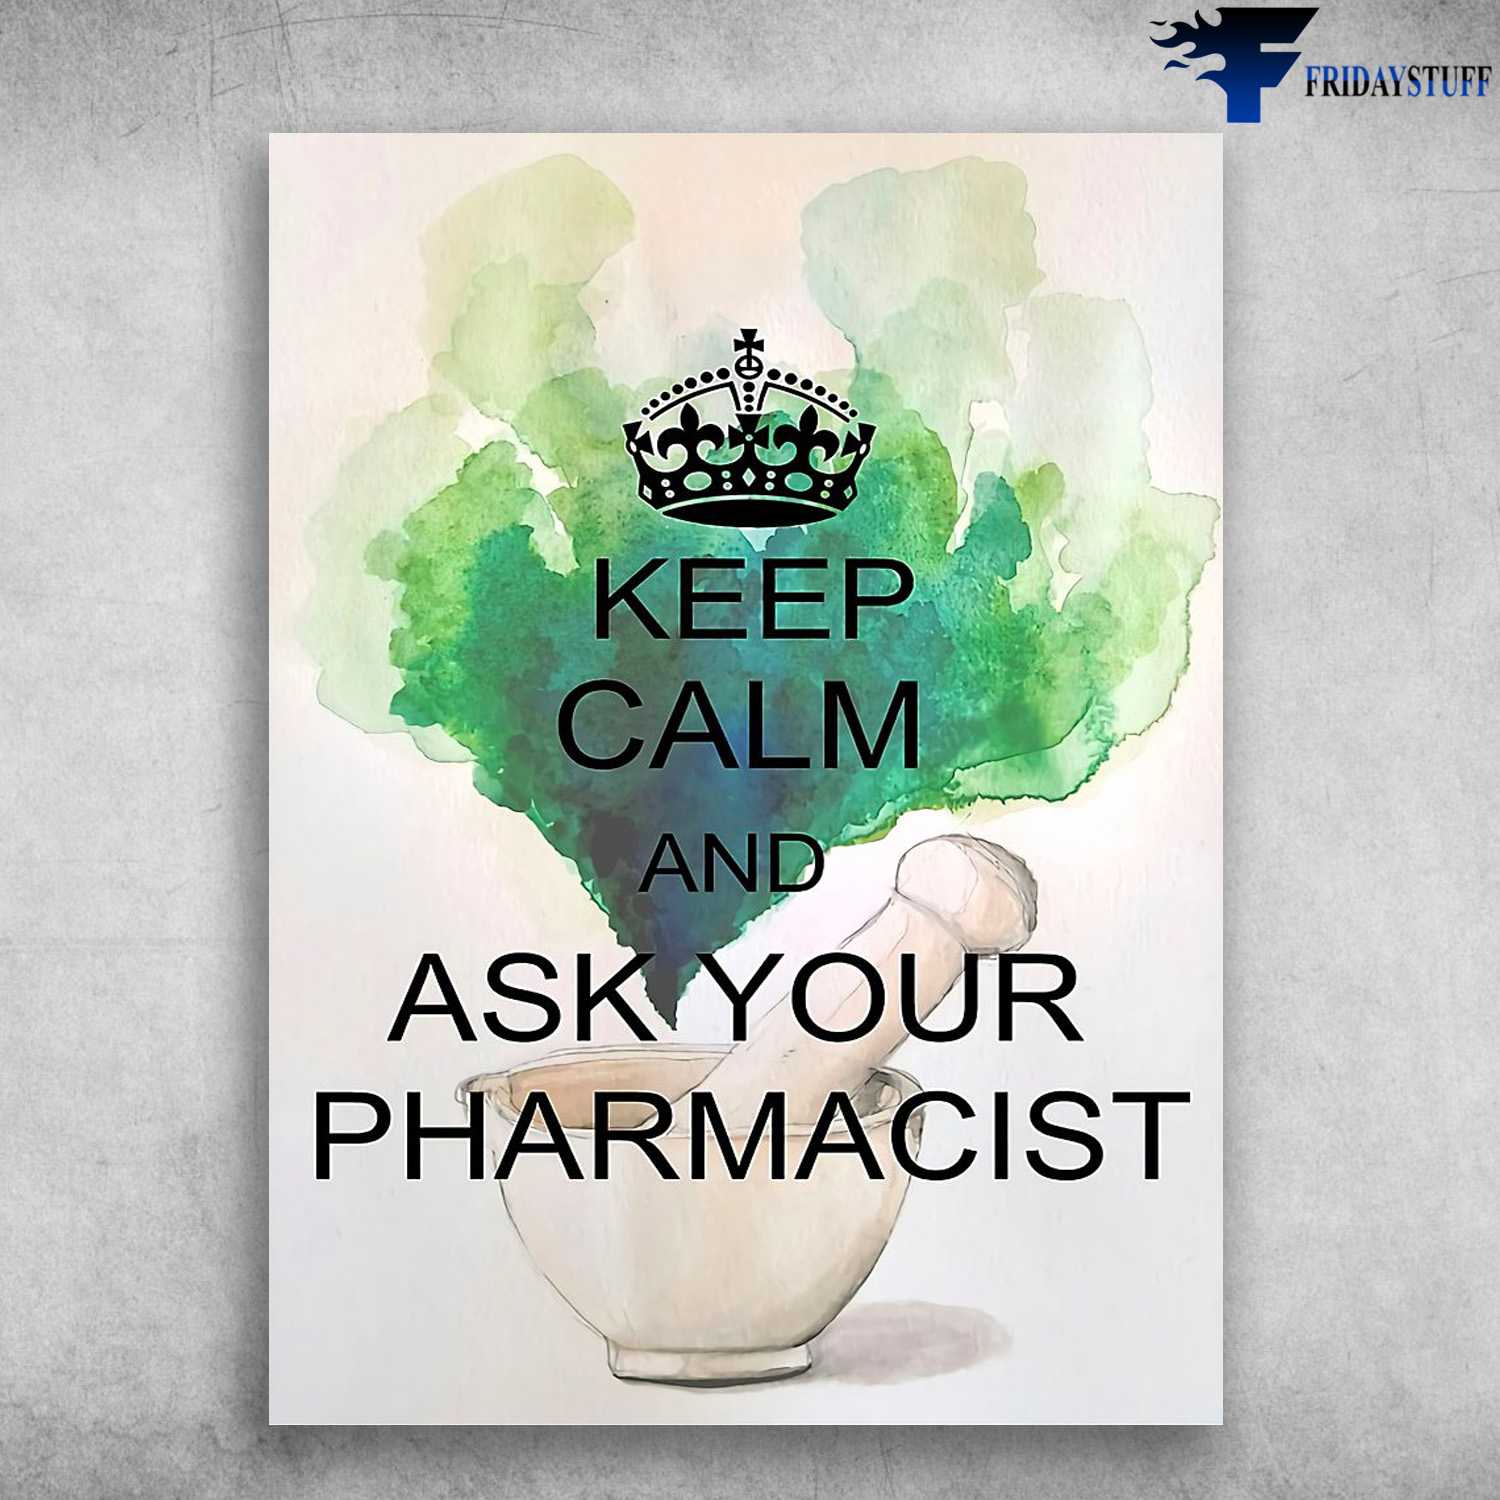 Phamacist Poster, Keep Calm, And Ask Your Pharmacist